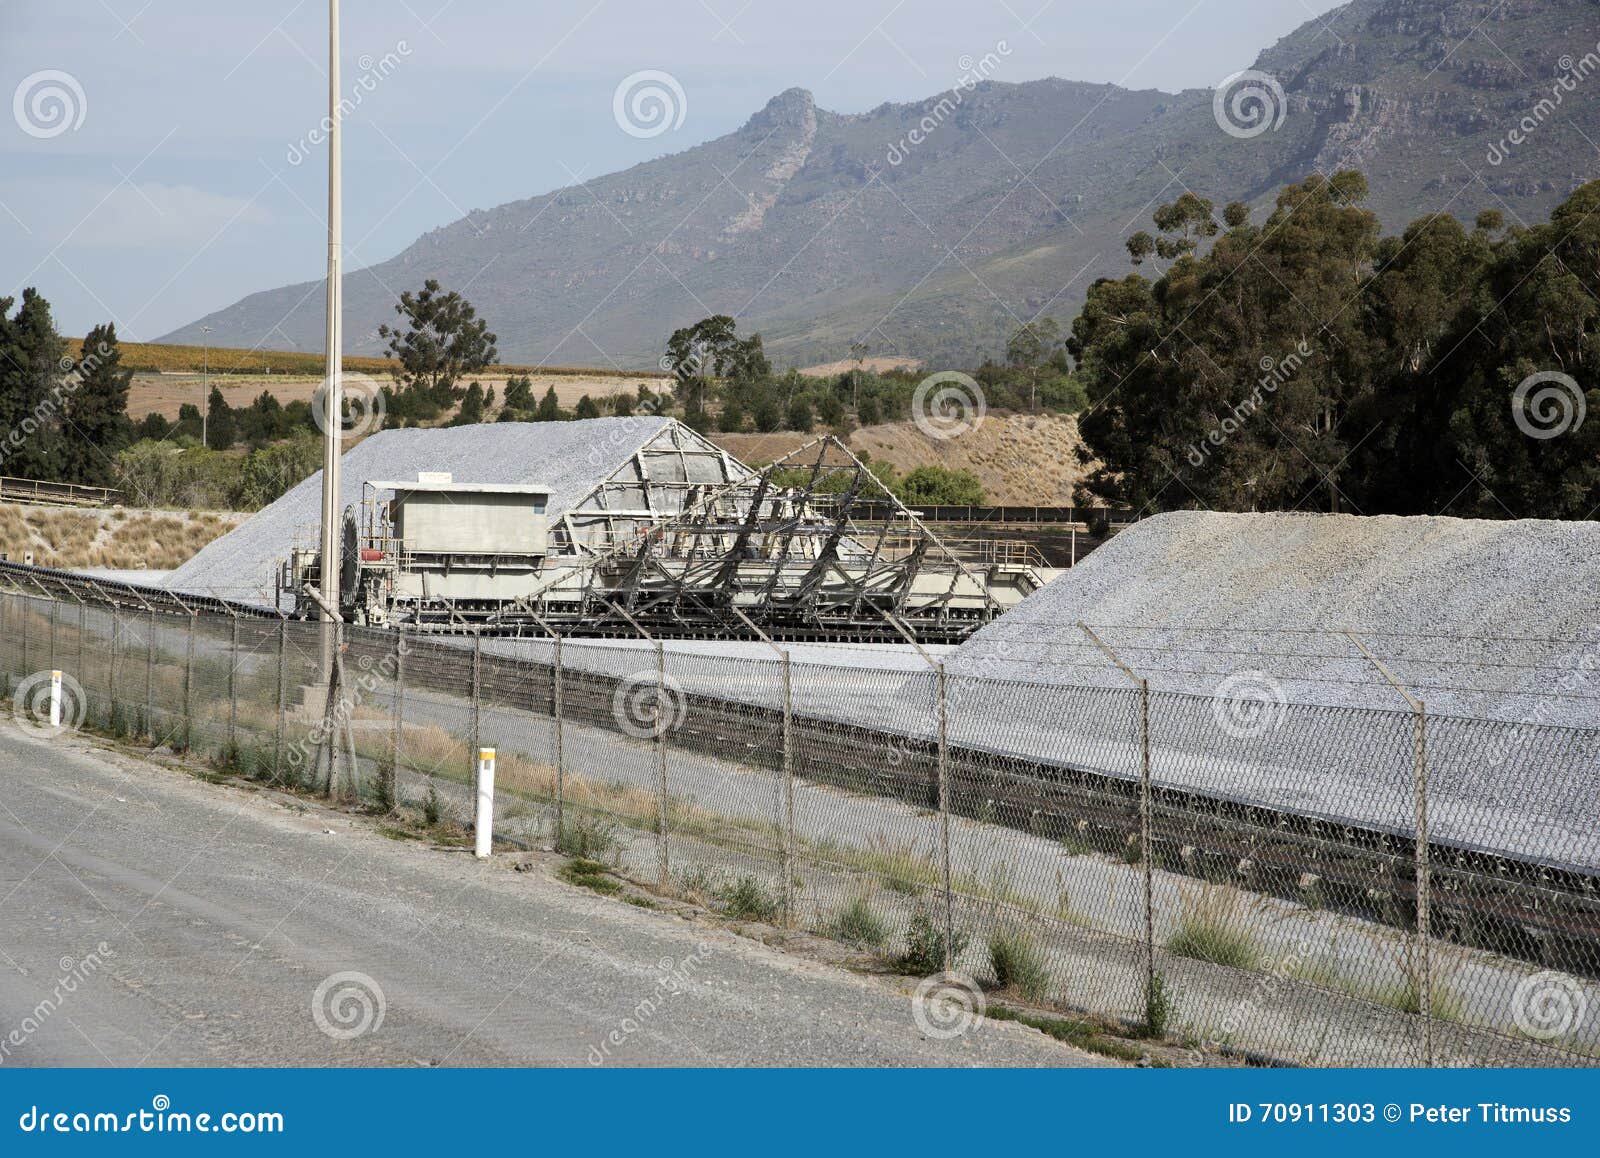 Cement Production Work South Africa Stock Image - Image of belt